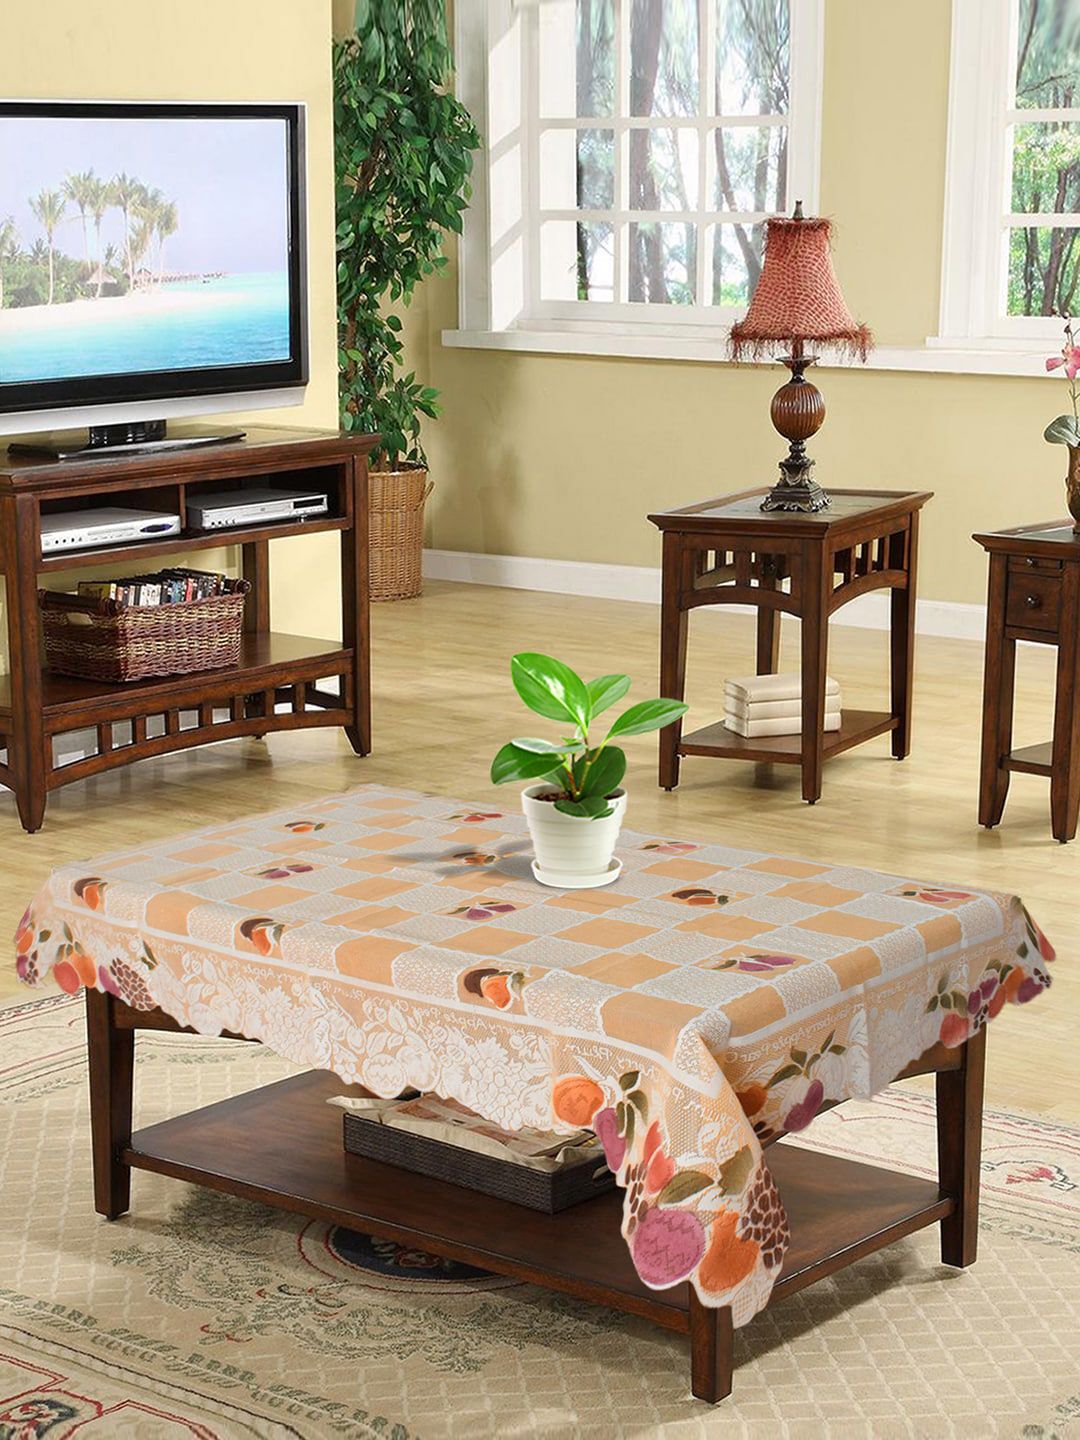 Kuber Industries Orange & White Printed 4-Seater Rectangular Table Cover Price in India